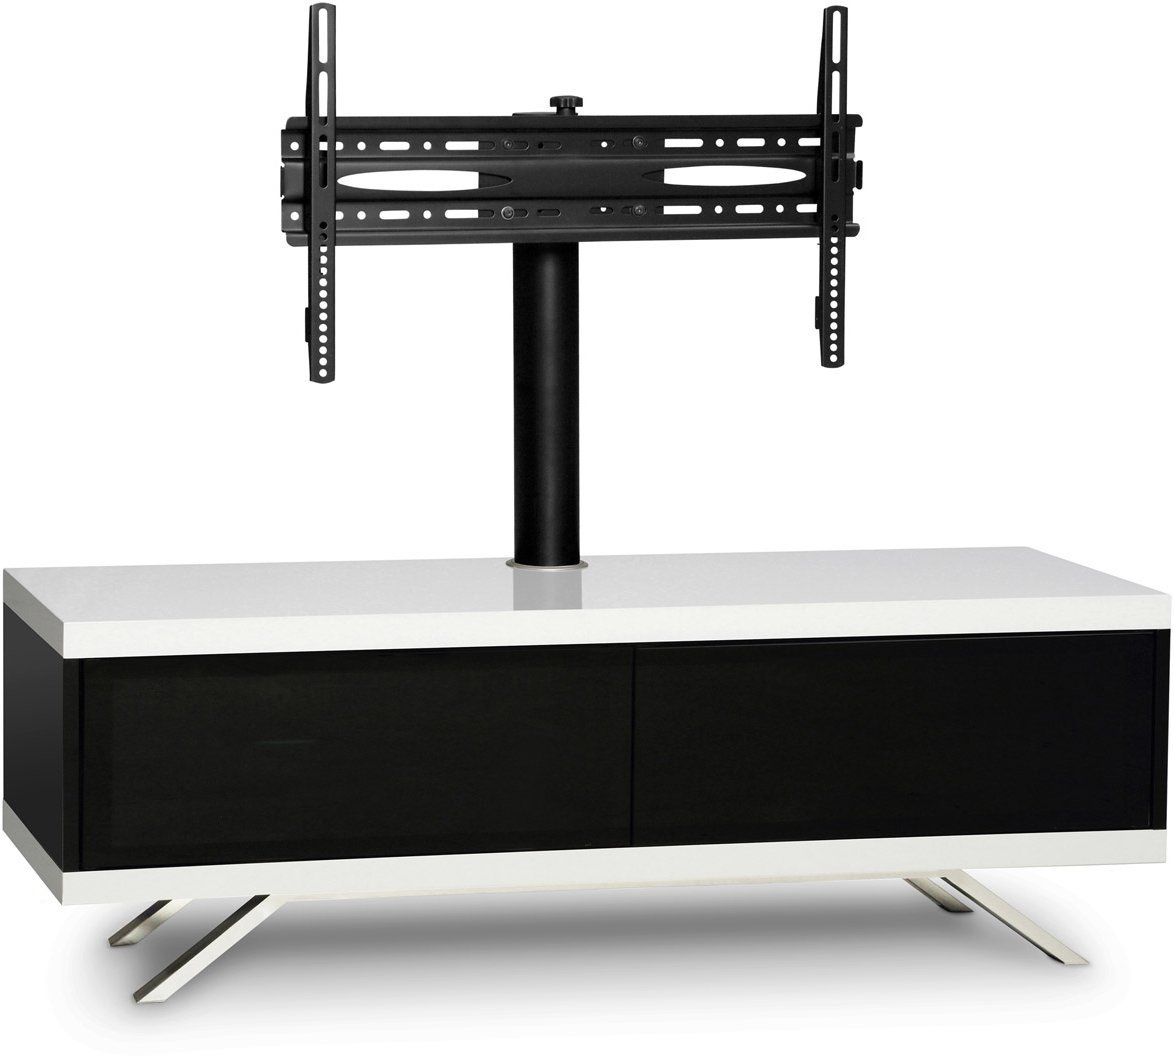 Mda Designs Tucana Wht Bkt Tucana Hybrid Cantilever Tv Throughout Tv Stand Cantilever (View 5 of 15)